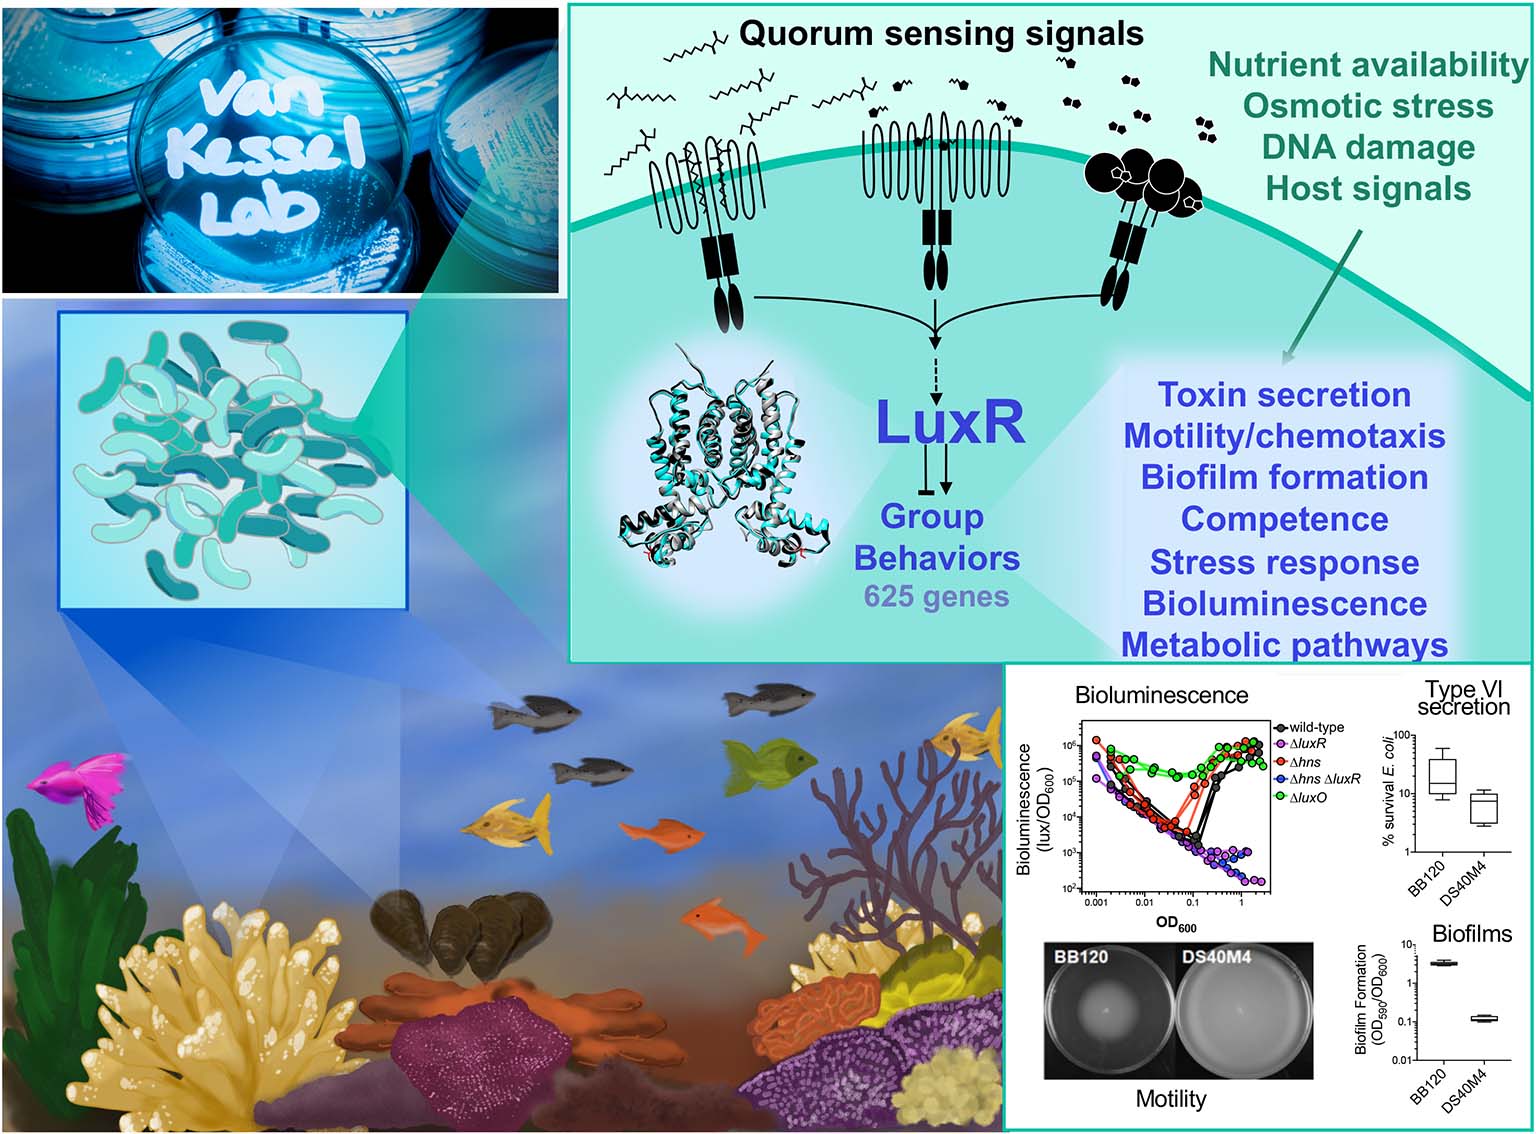 Collage of images representing Julia van Kessel's research: quorum sensing signals diagram, media plates with fluorescent microbes, bioluminescence graphs, drawing of fish swimming in ocean.